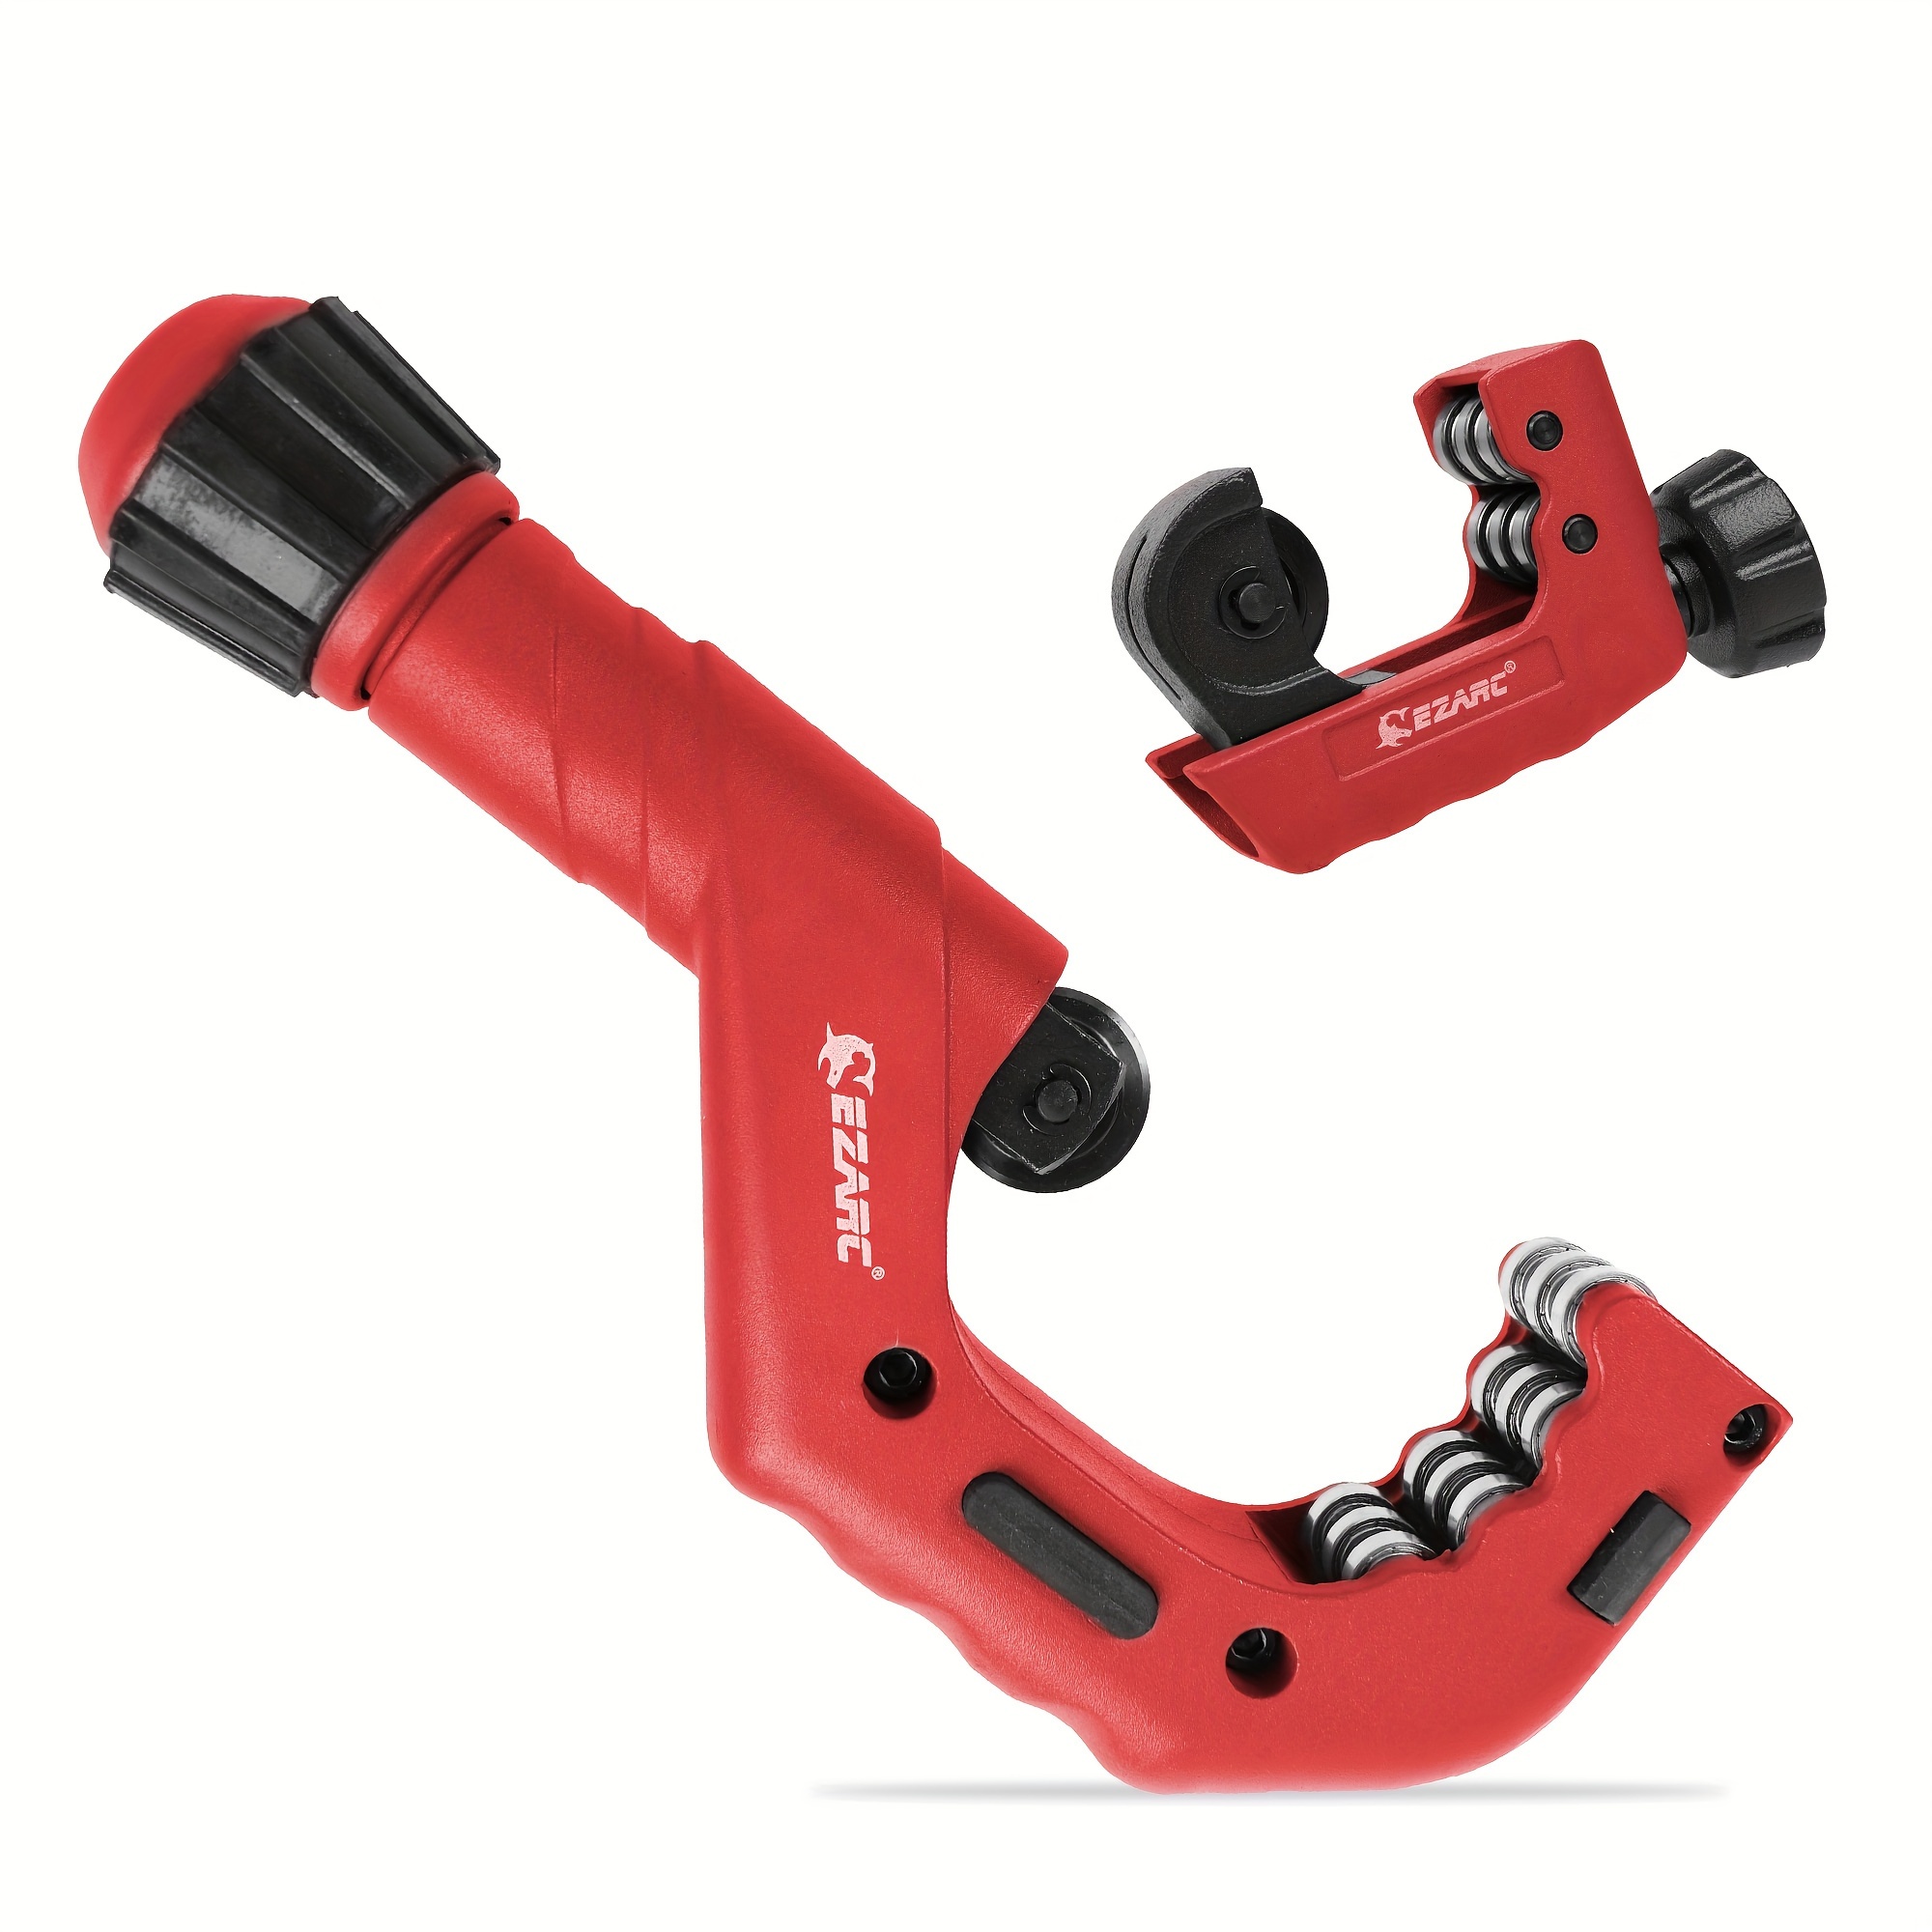 

Ezarc Heavy Duty Pipe Cutter Set, Tubing Cutter For 1/4" To 2-3/4" Od, Mini Tube Cutter For 3/16" To 1-1/8", Tubing Cutters For Copper, Aluminum, Pvc Pipes, With A Thickness Not Exceeding 2.5mm